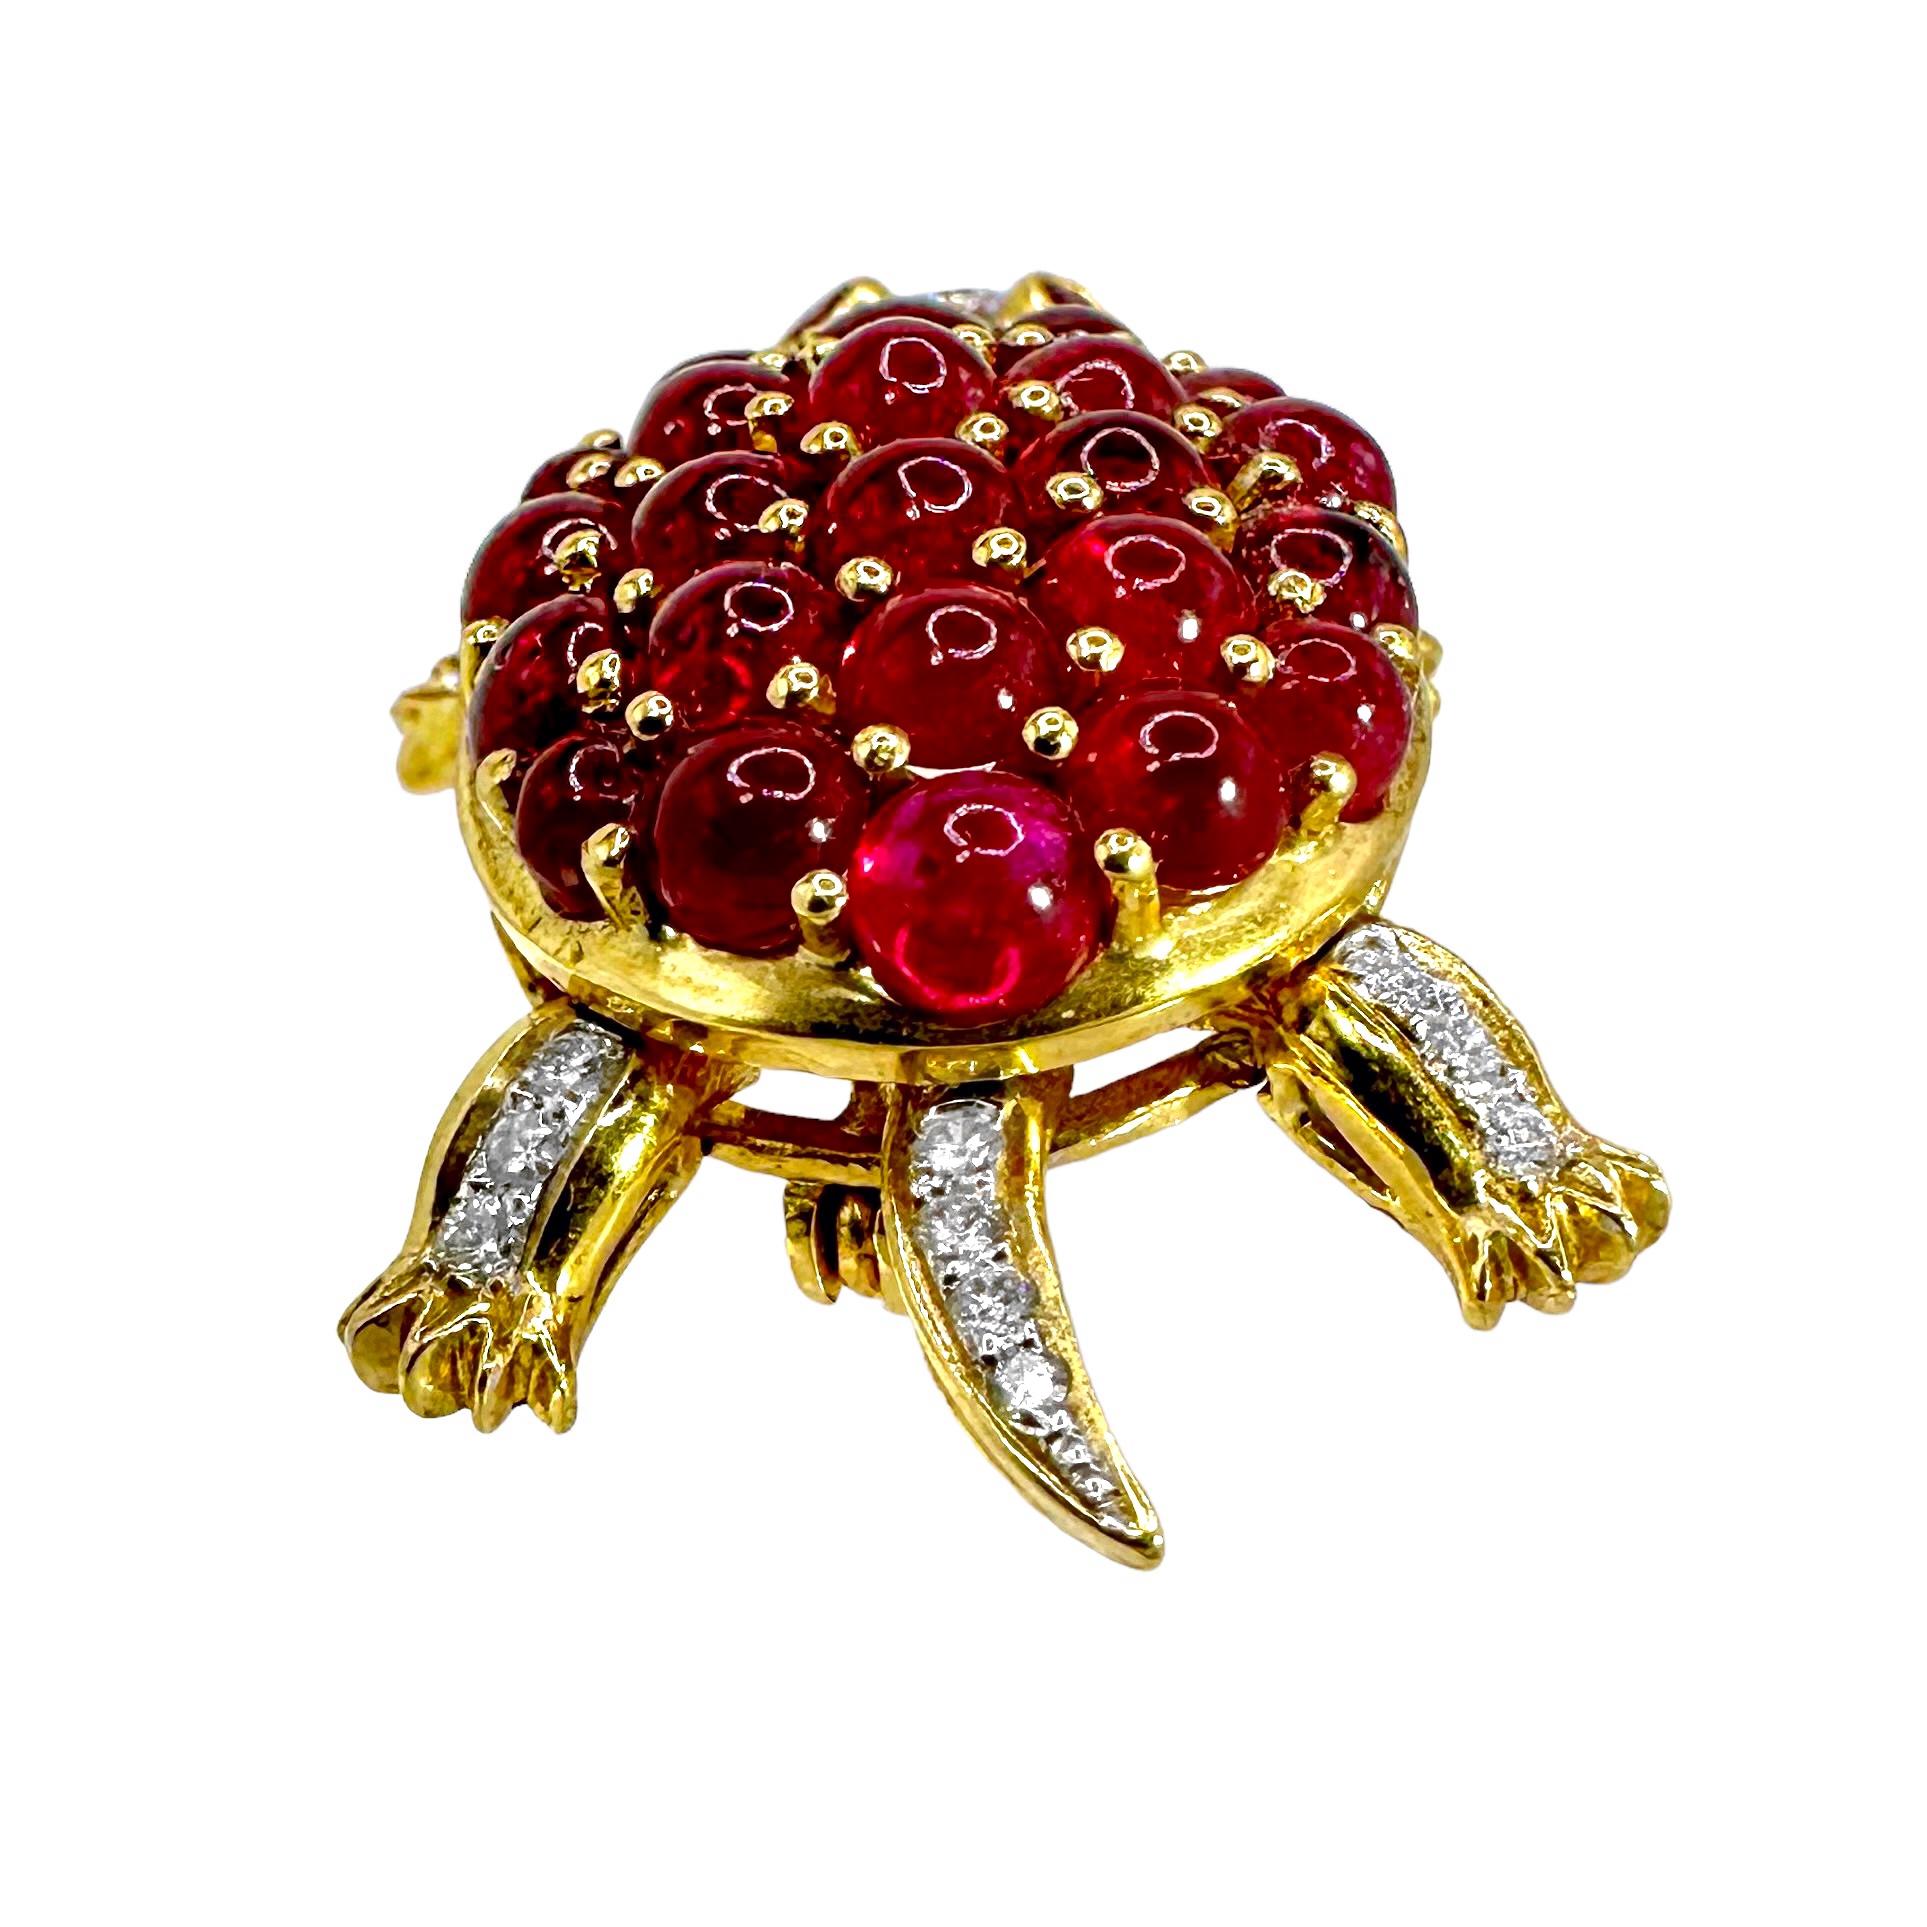 Round Cut Adorable Turtle Brooch/Pendant with Motion in 18K Gold, Diamonds, and Rubies For Sale